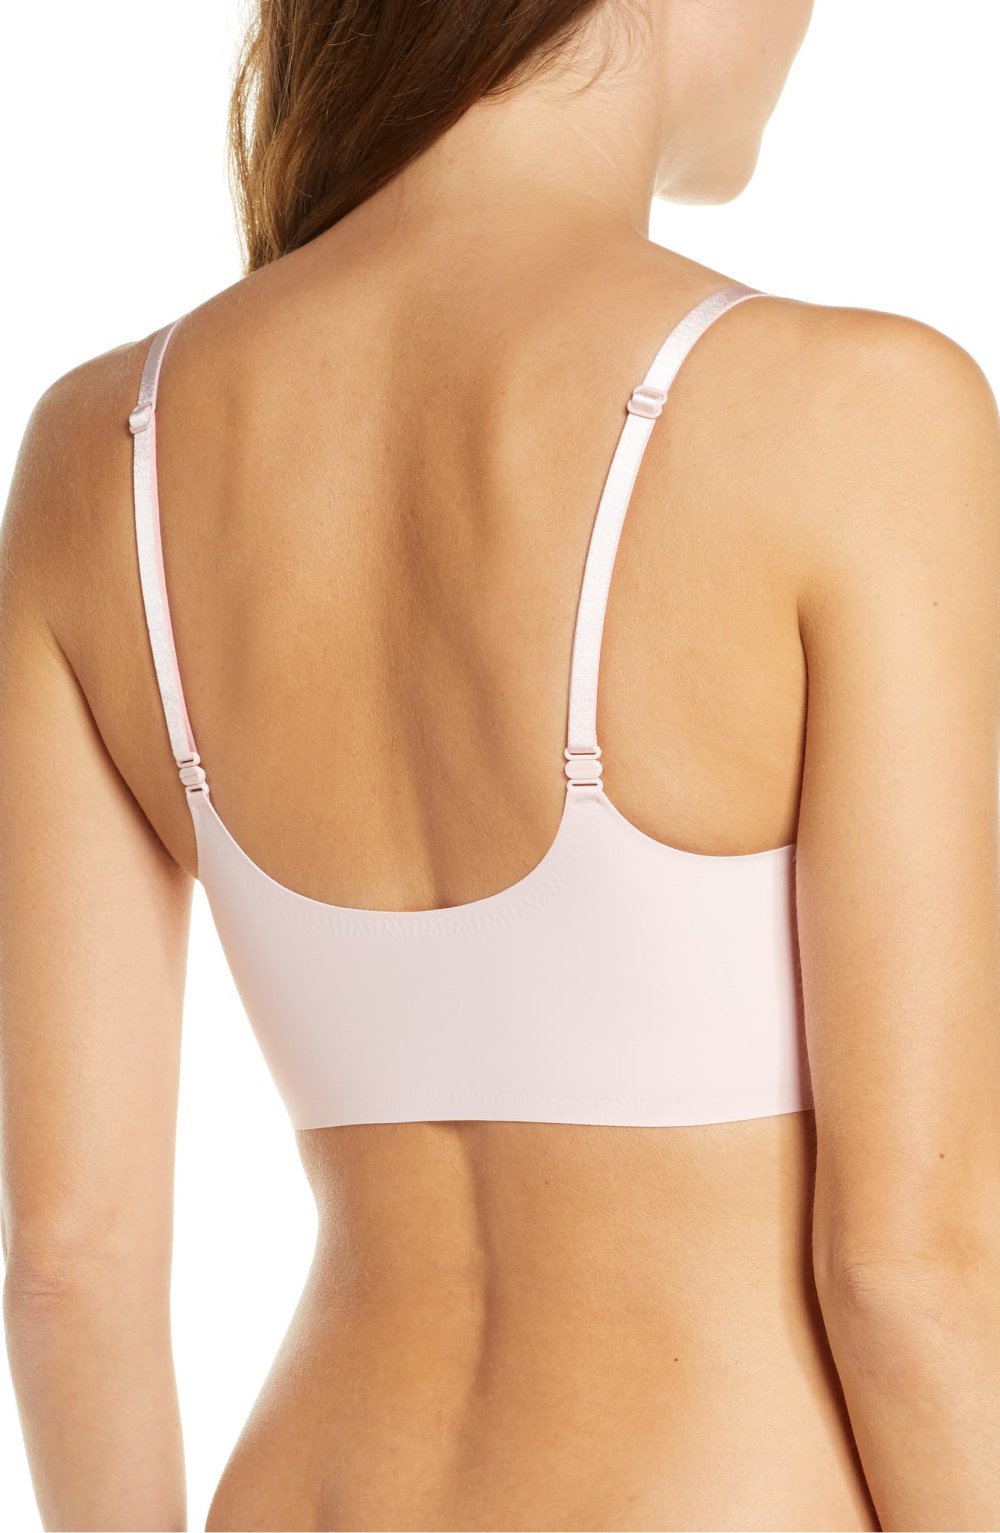 True & Co. Bra Is So Comfy That Reviewers Are Buying Every Color